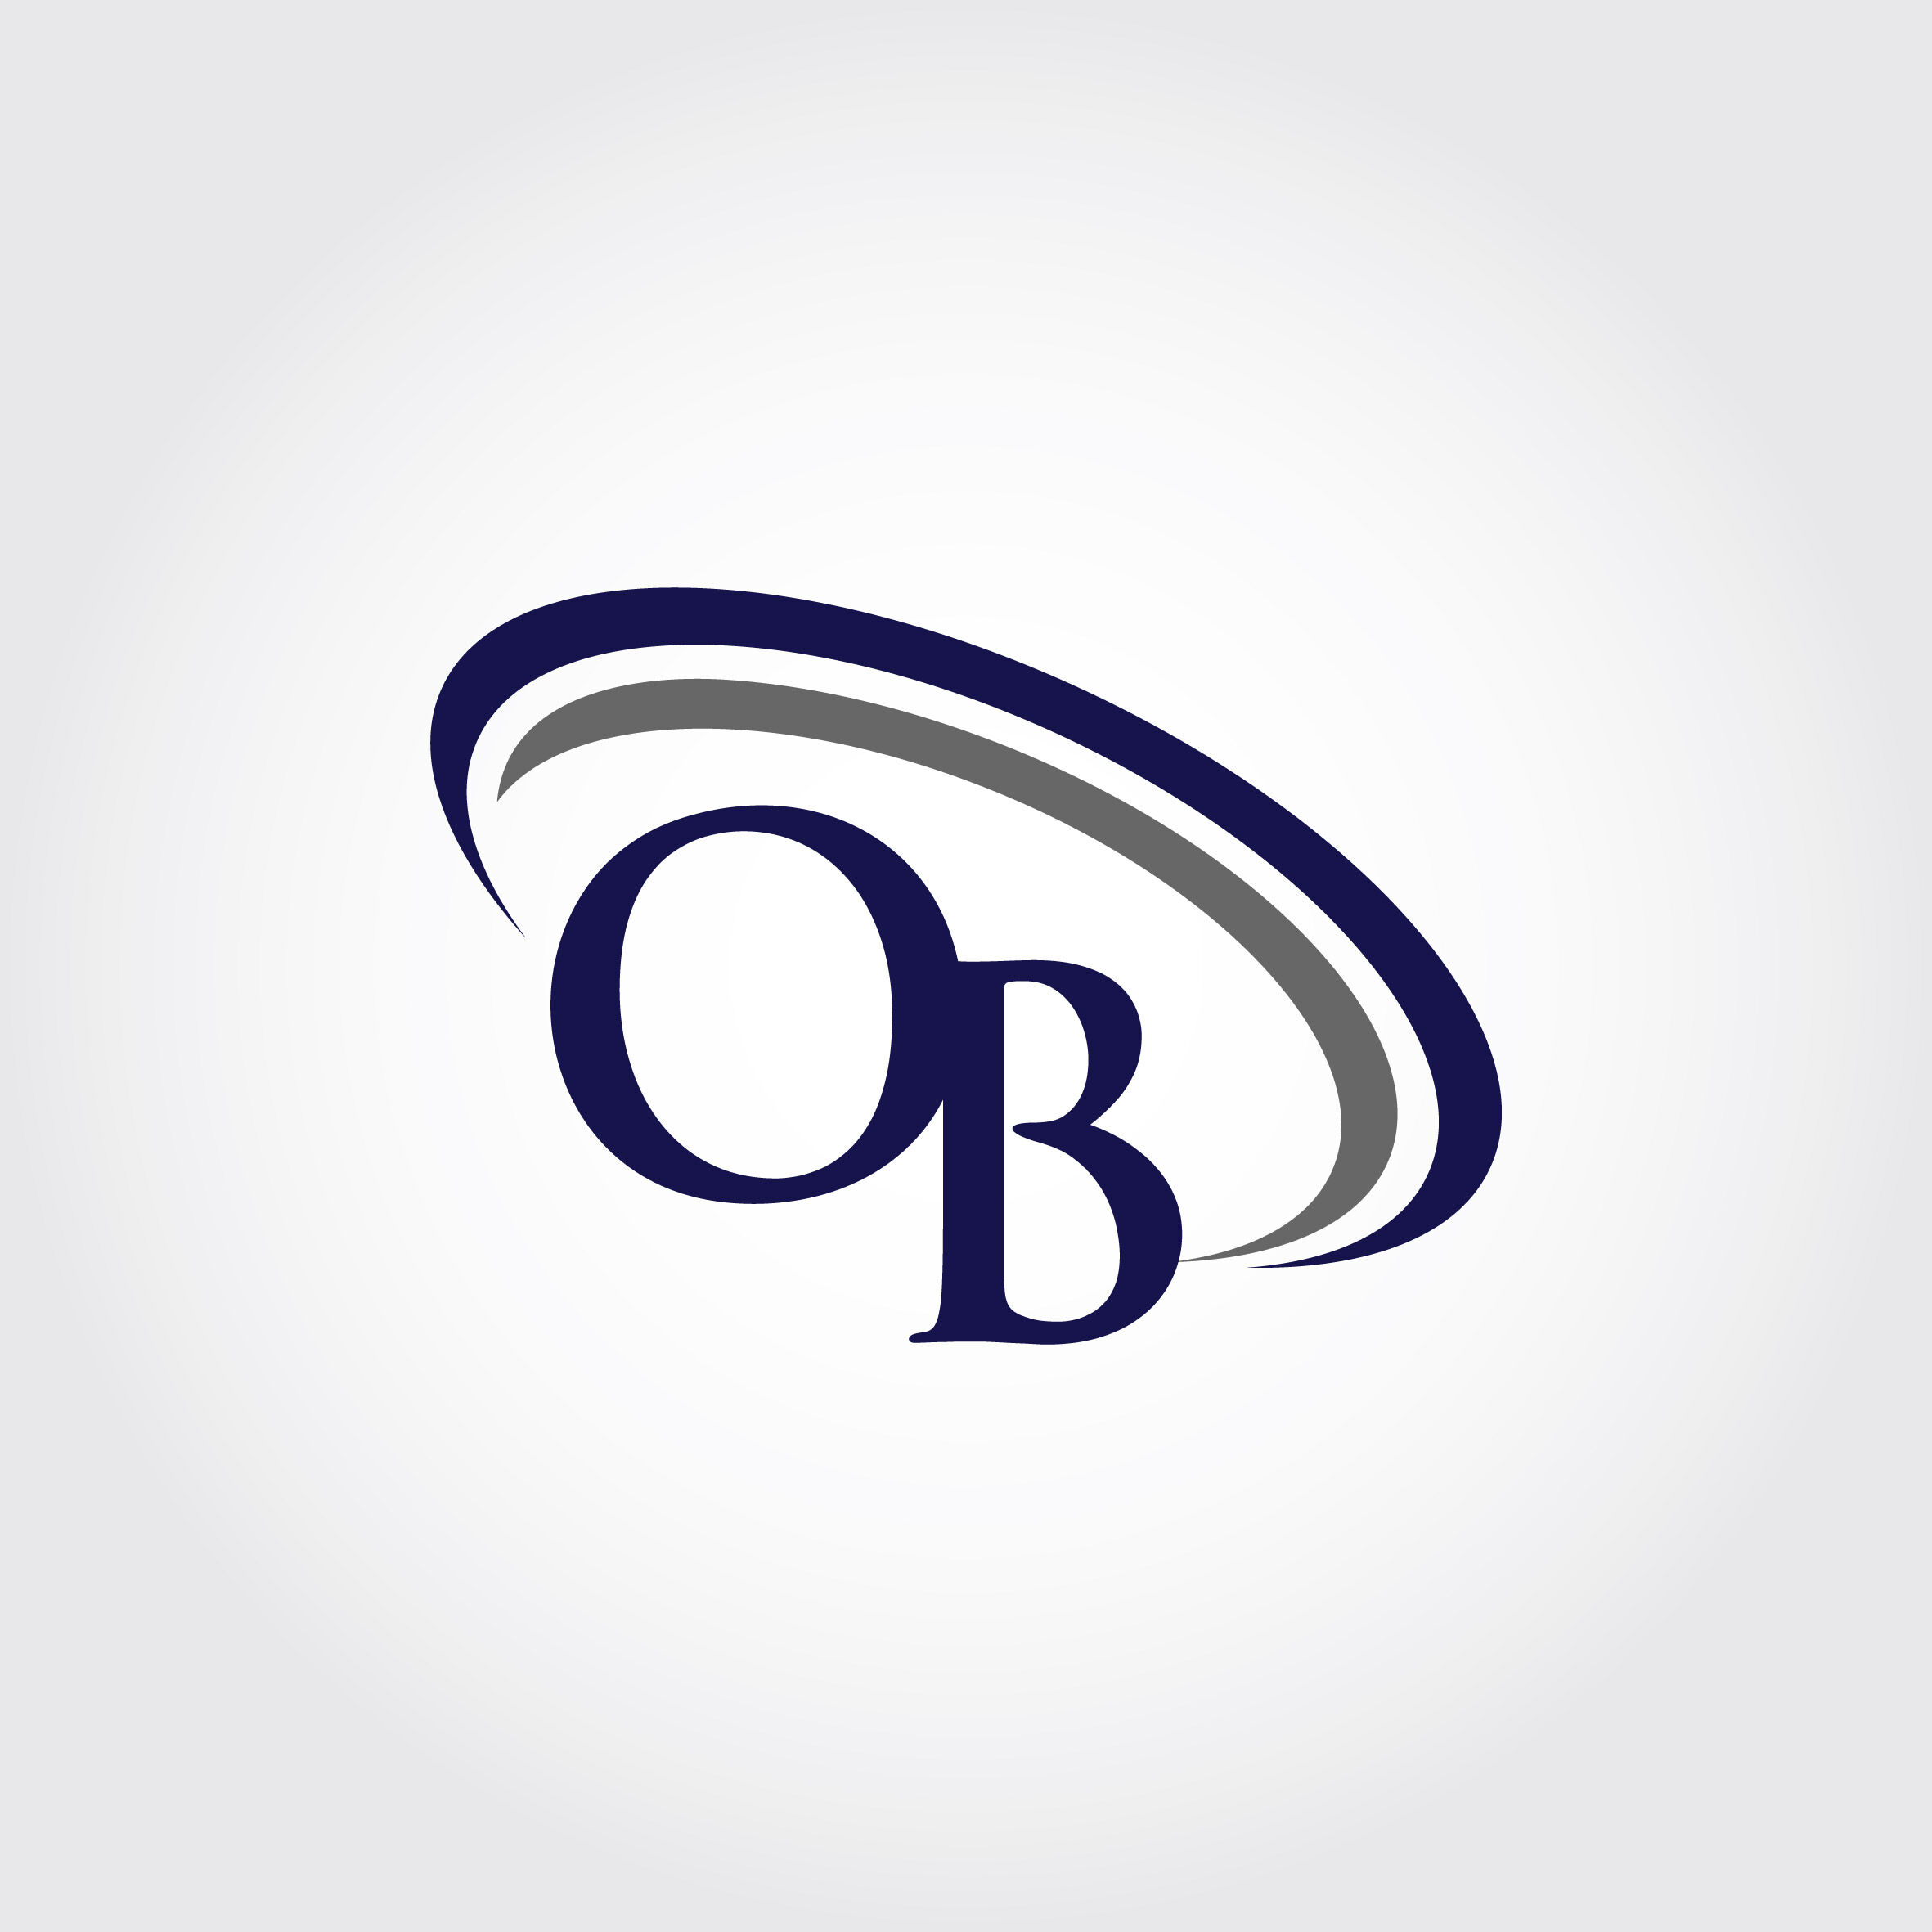 OB Odense (70's logo) | Brands of the World™ | Download vector logos and  logotypes